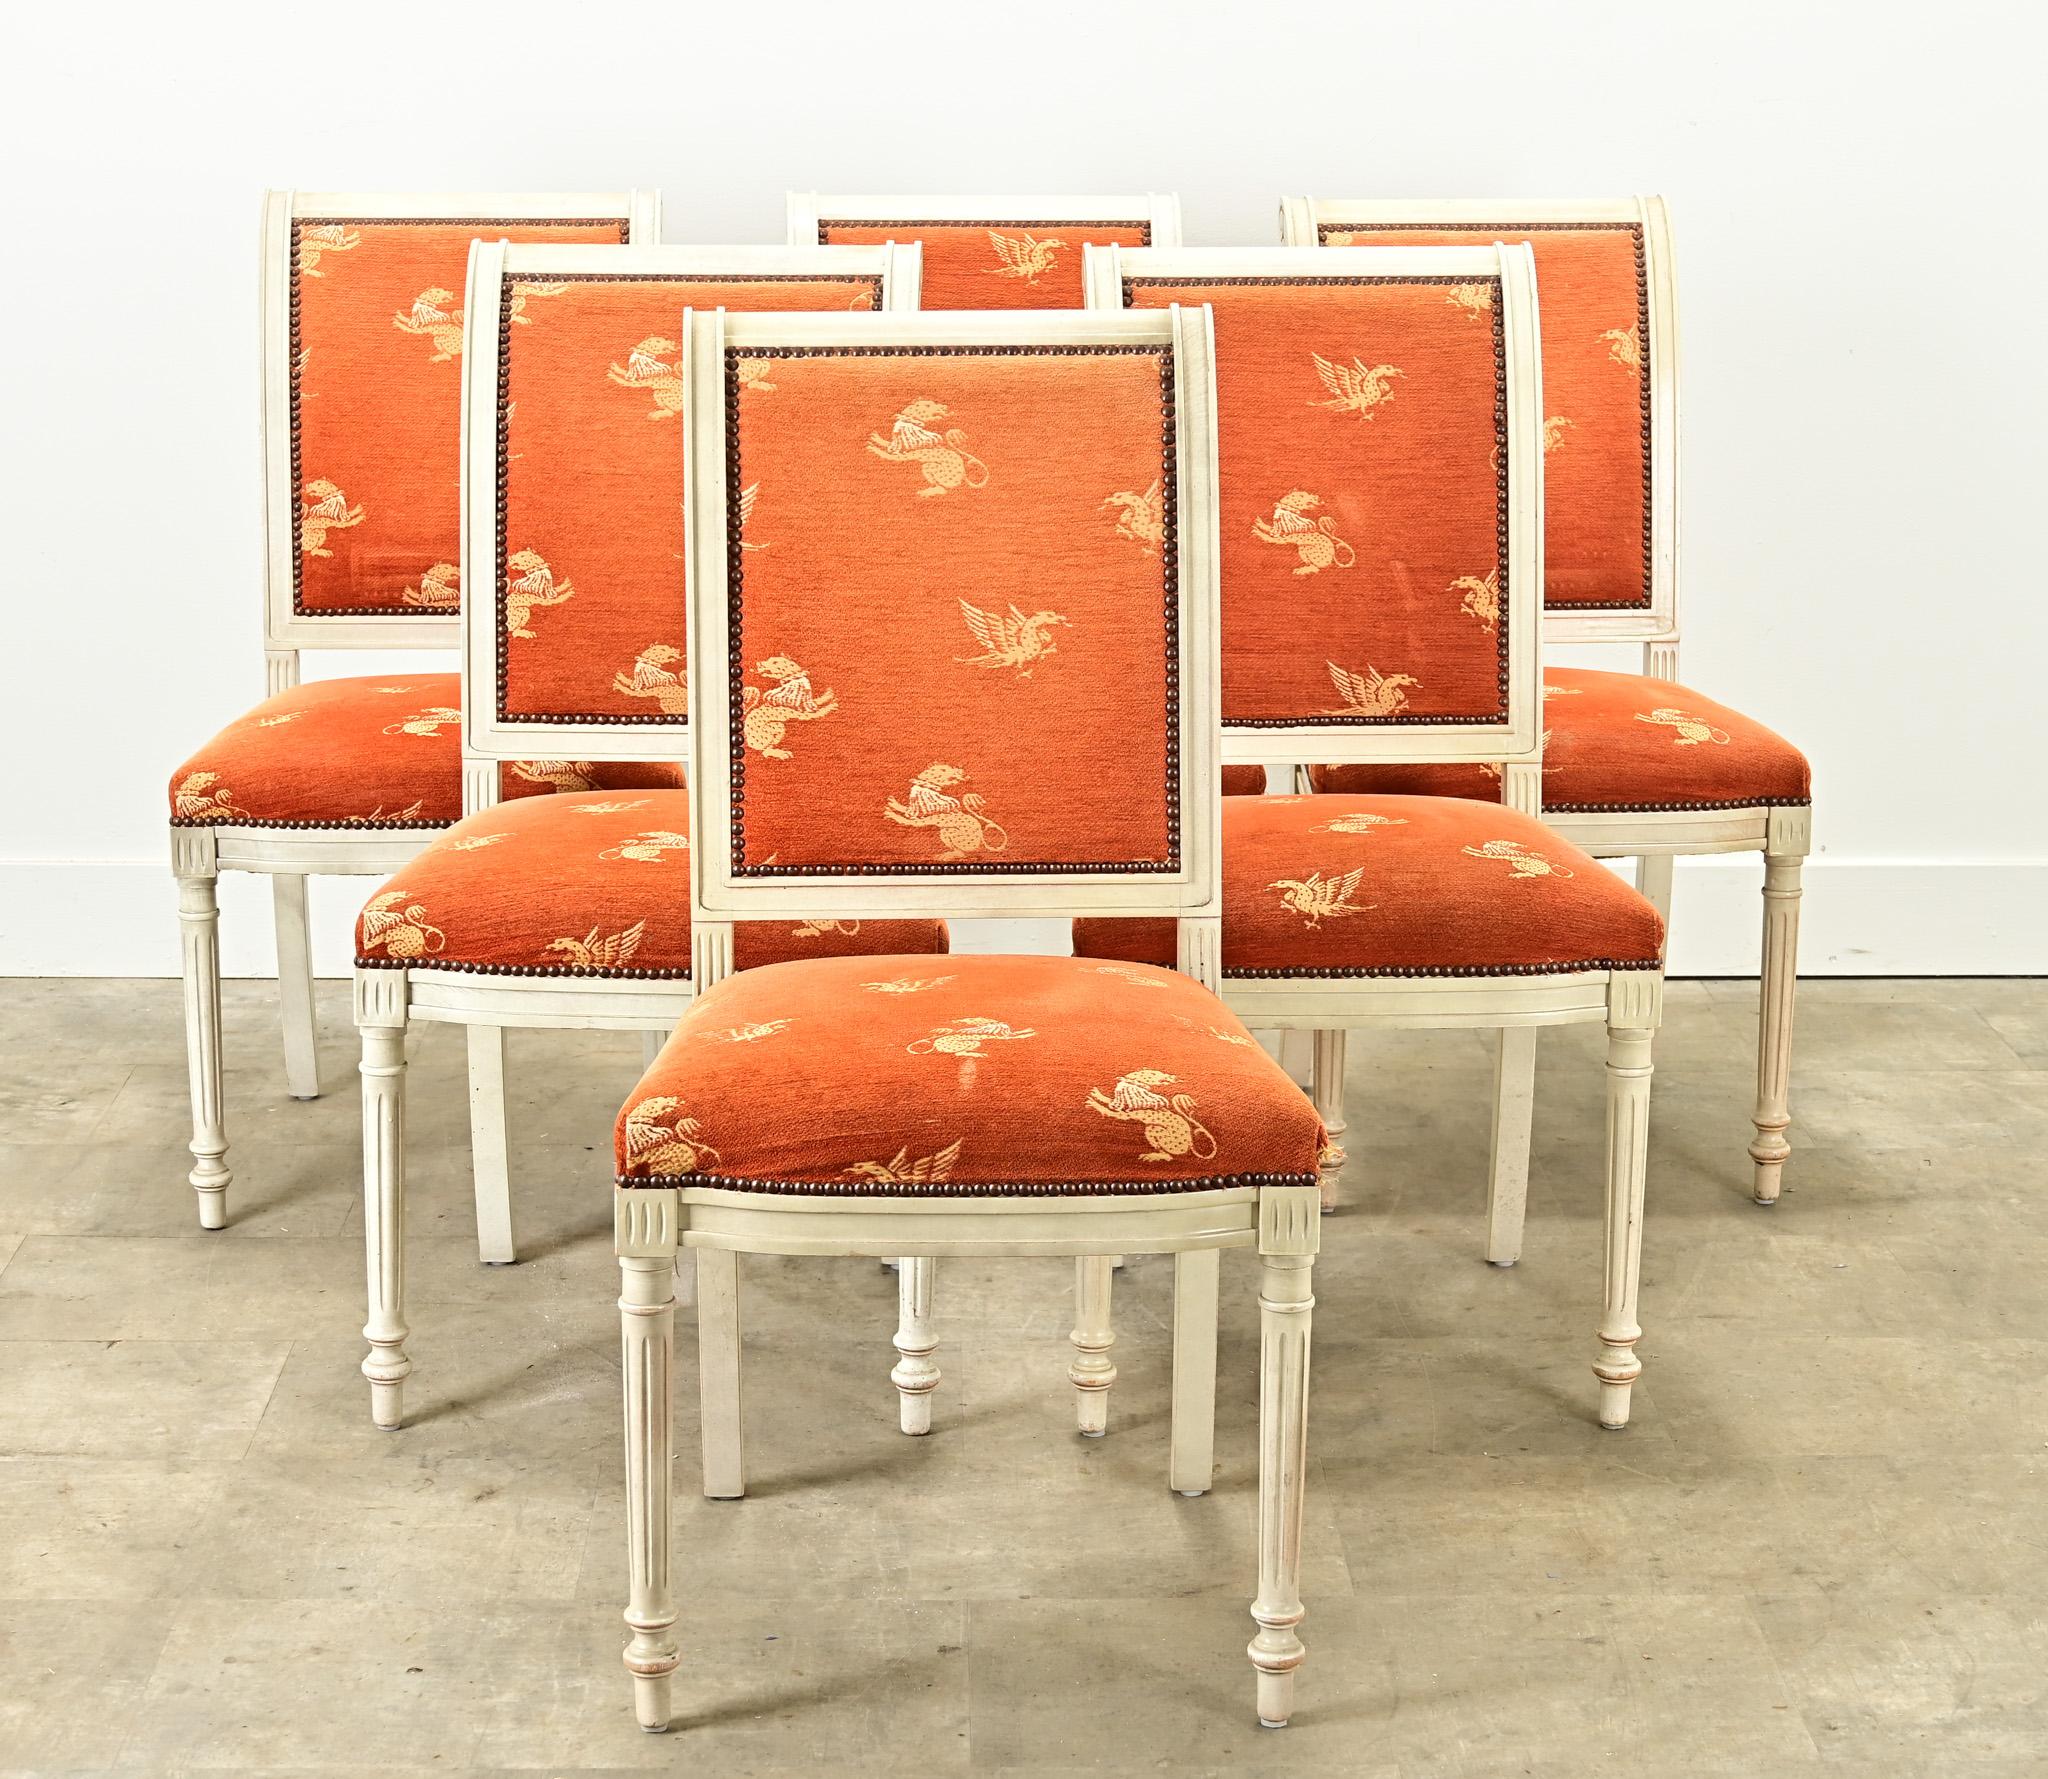 A vintage set of six Louis XVI style upholstered dining chairs with painted frames. These comfortable dining chairs have a worn bright orange fabric with griffin motifs secured by brass nailheads. The carved and painted frames are sturdy and painted